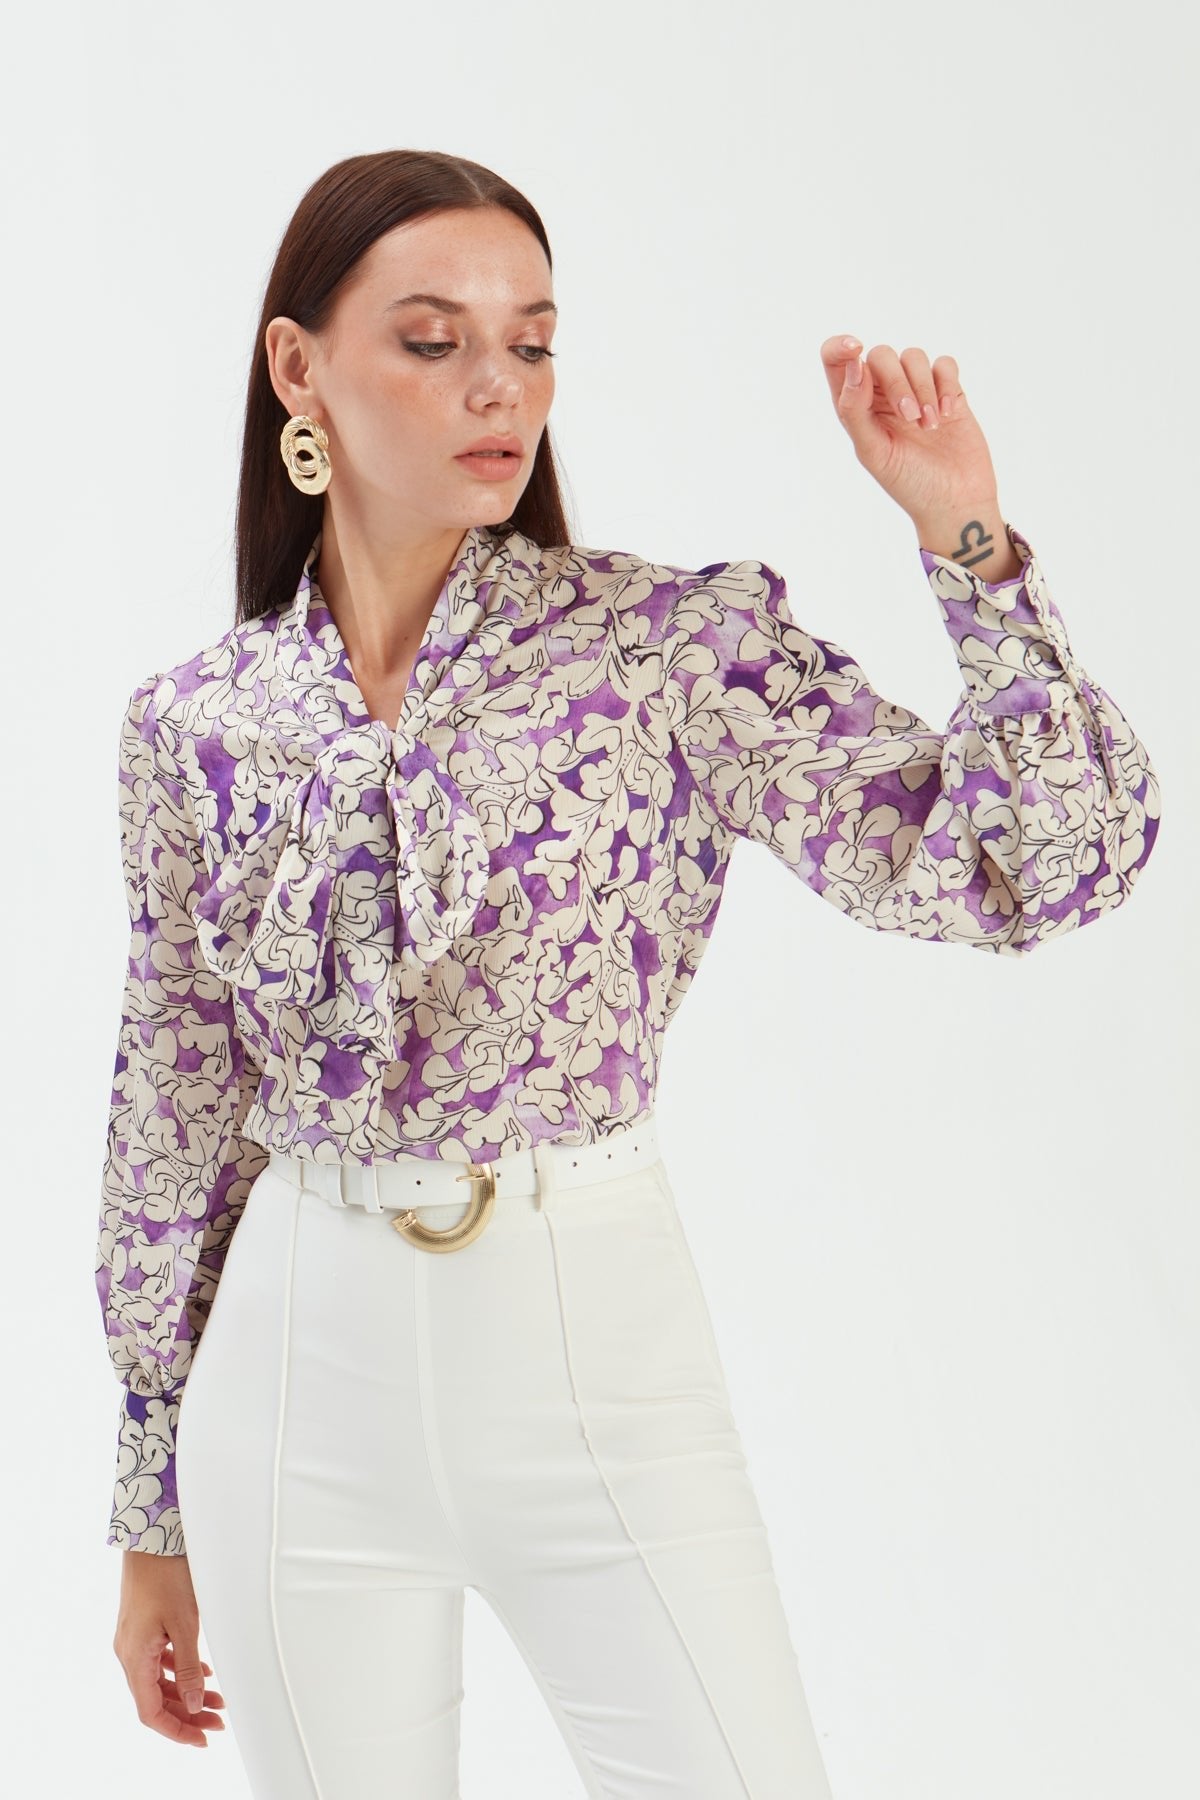 Bow Tie Collar Patterned Blouse - PURPLE - Top - LussoCA